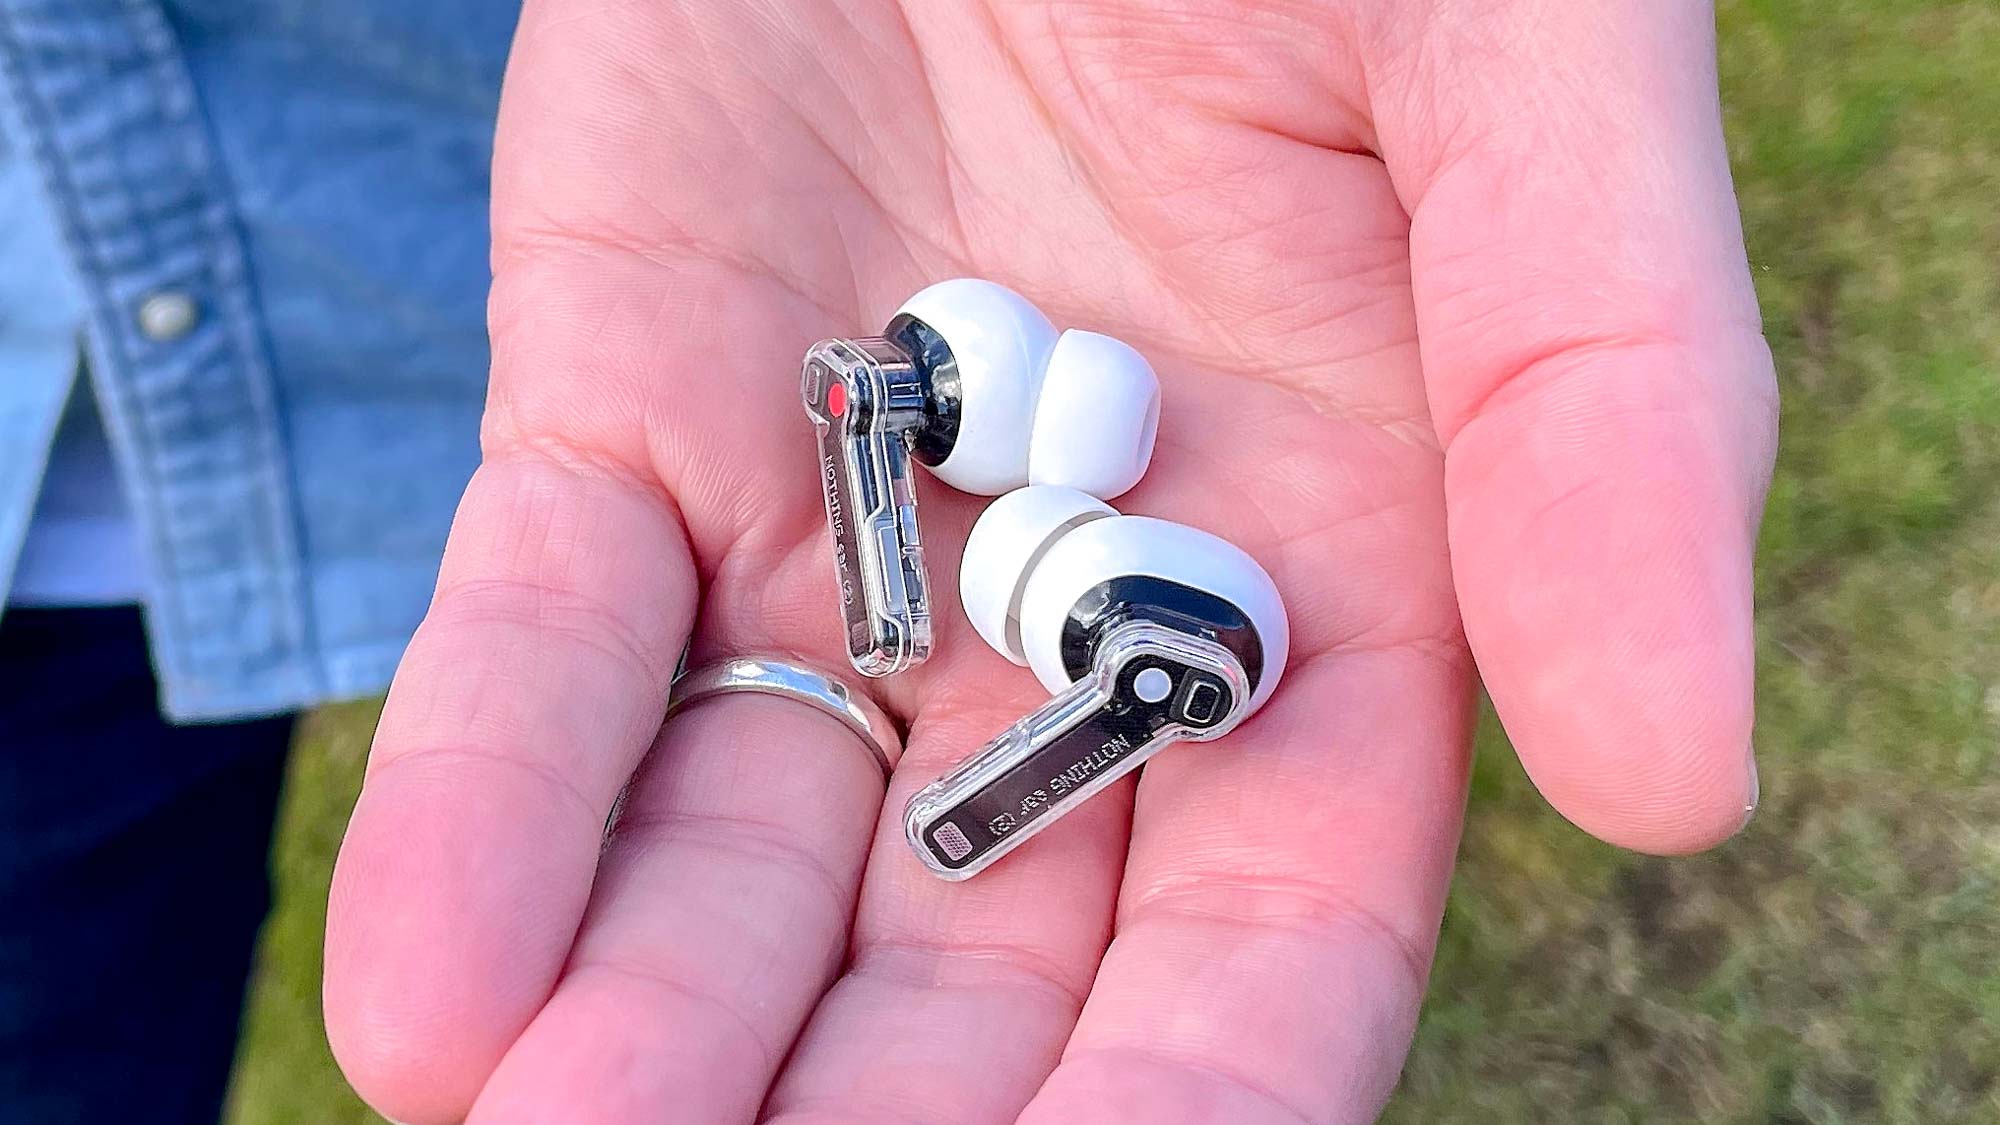 Nothing Ear 2 review: it's what's on the inside that counts - The Verge